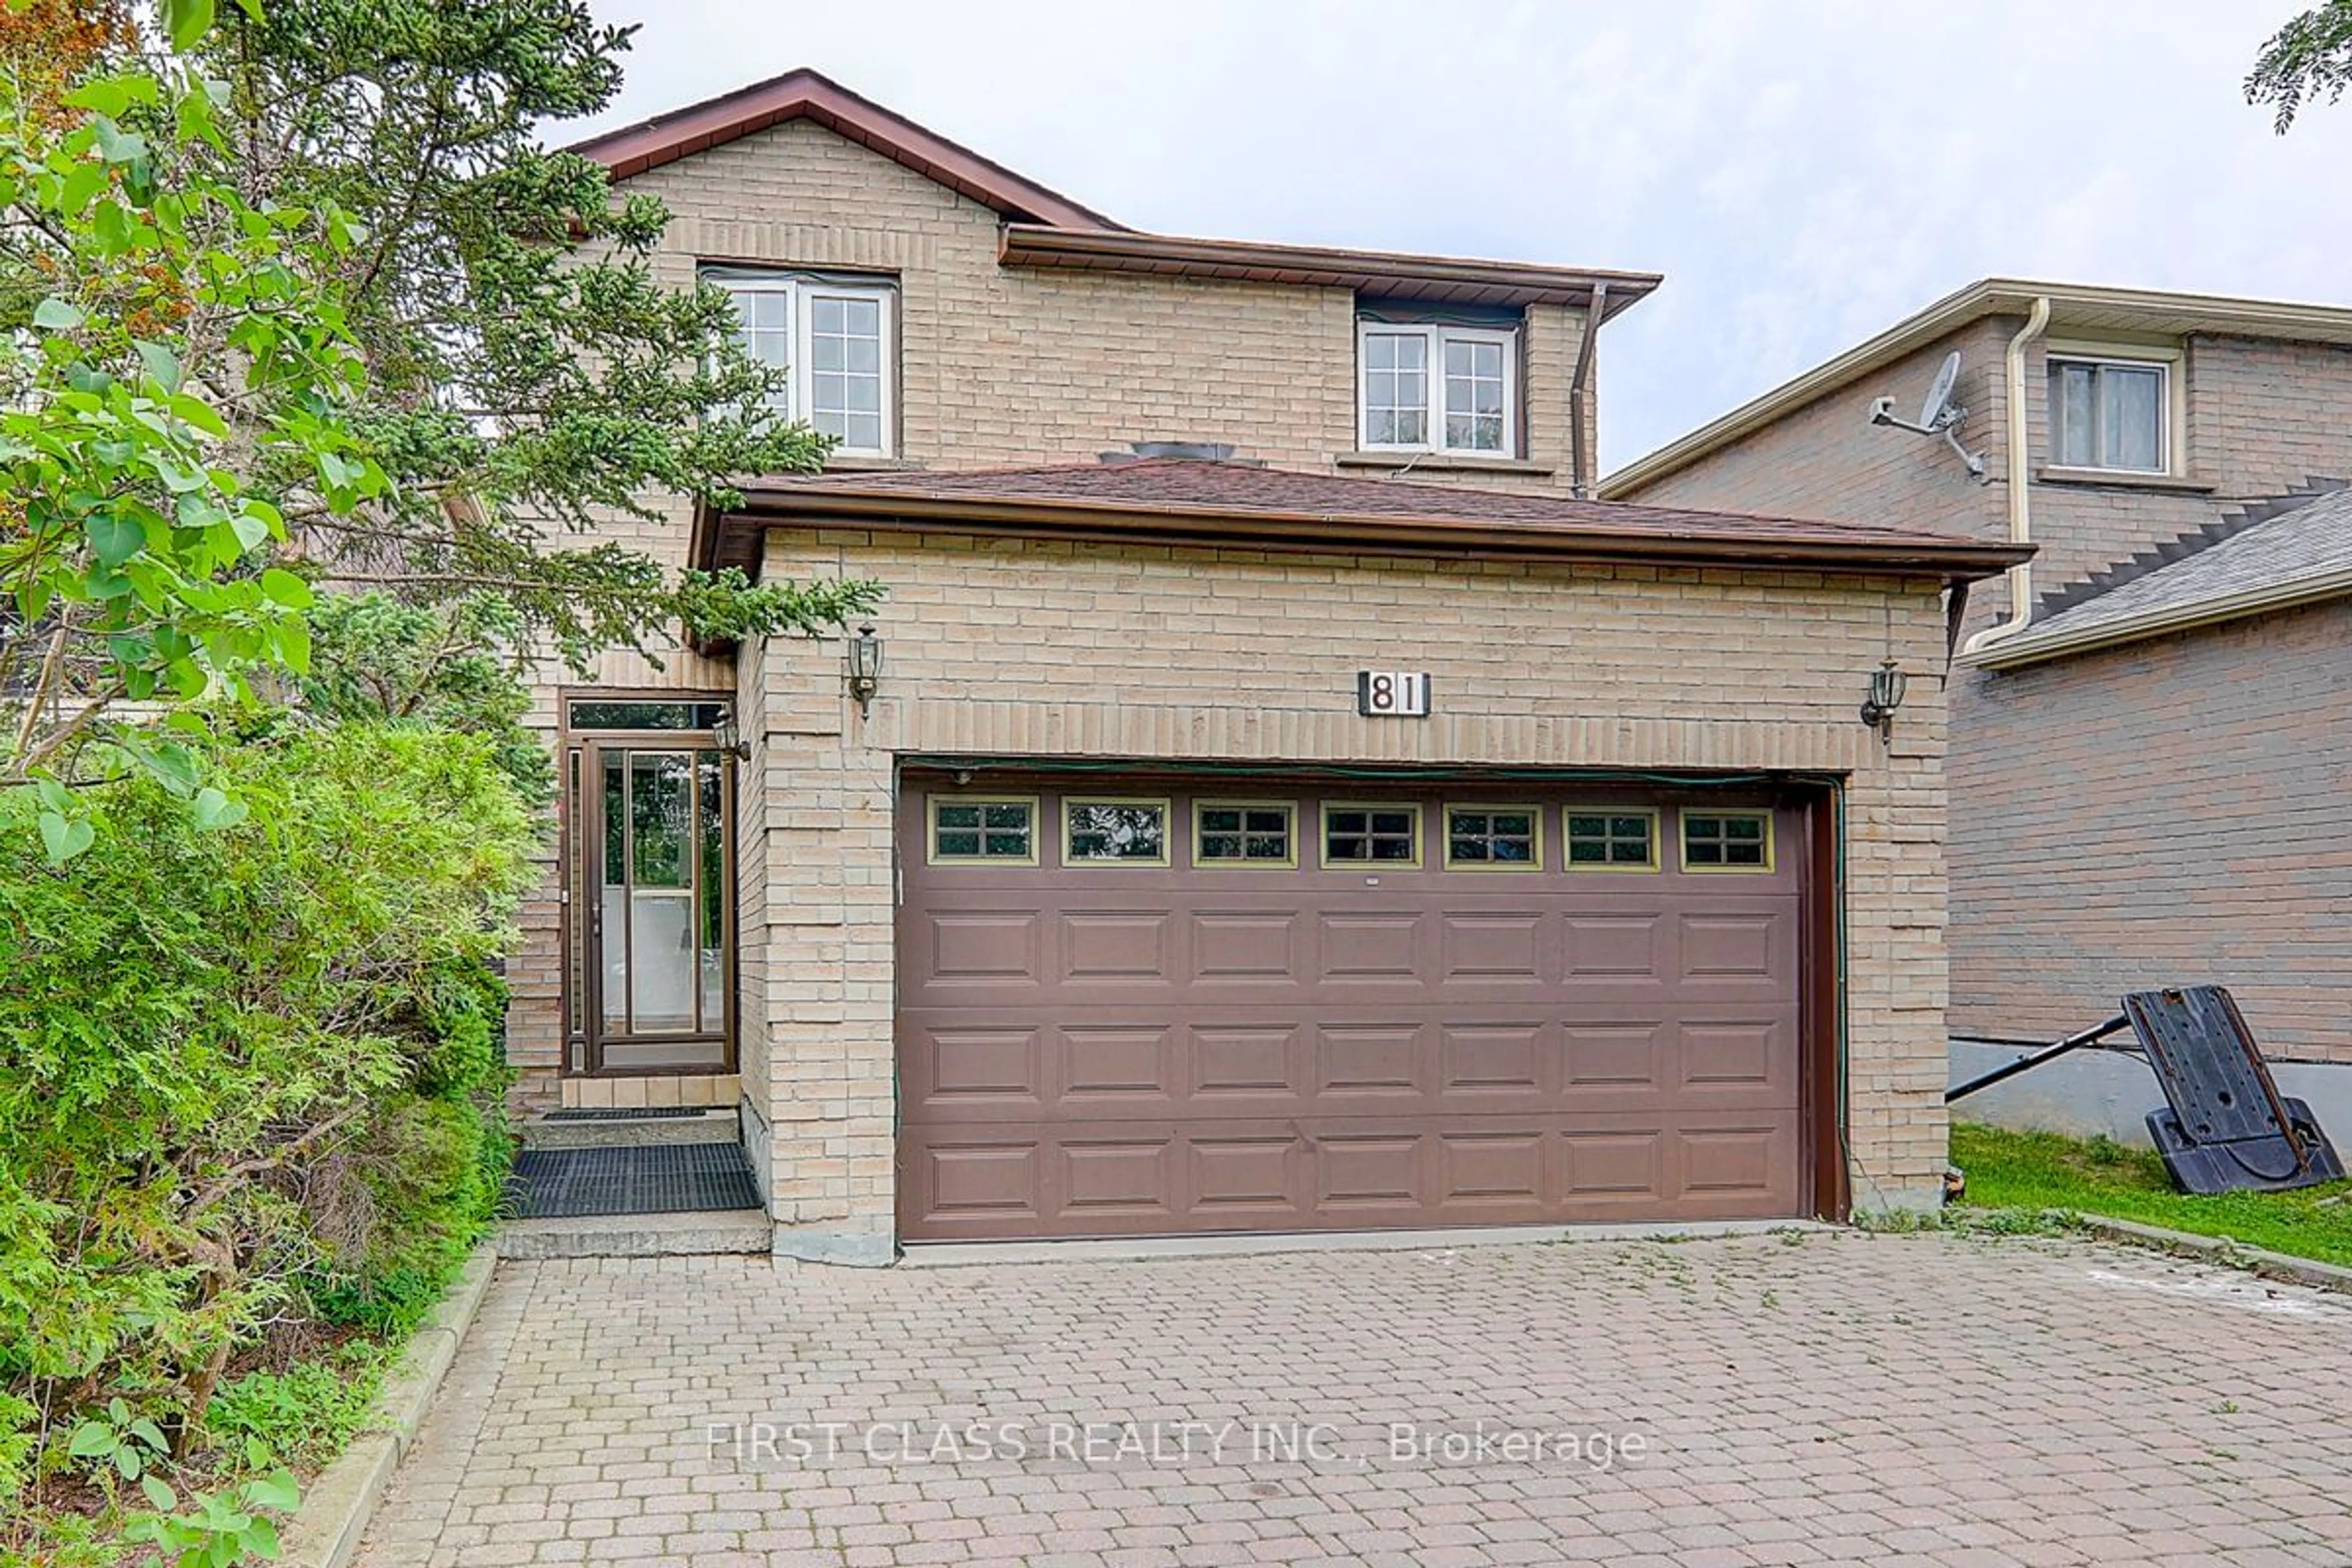 Home with brick exterior material for 81 Stirling Cres, Markham Ontario L3R 7J8